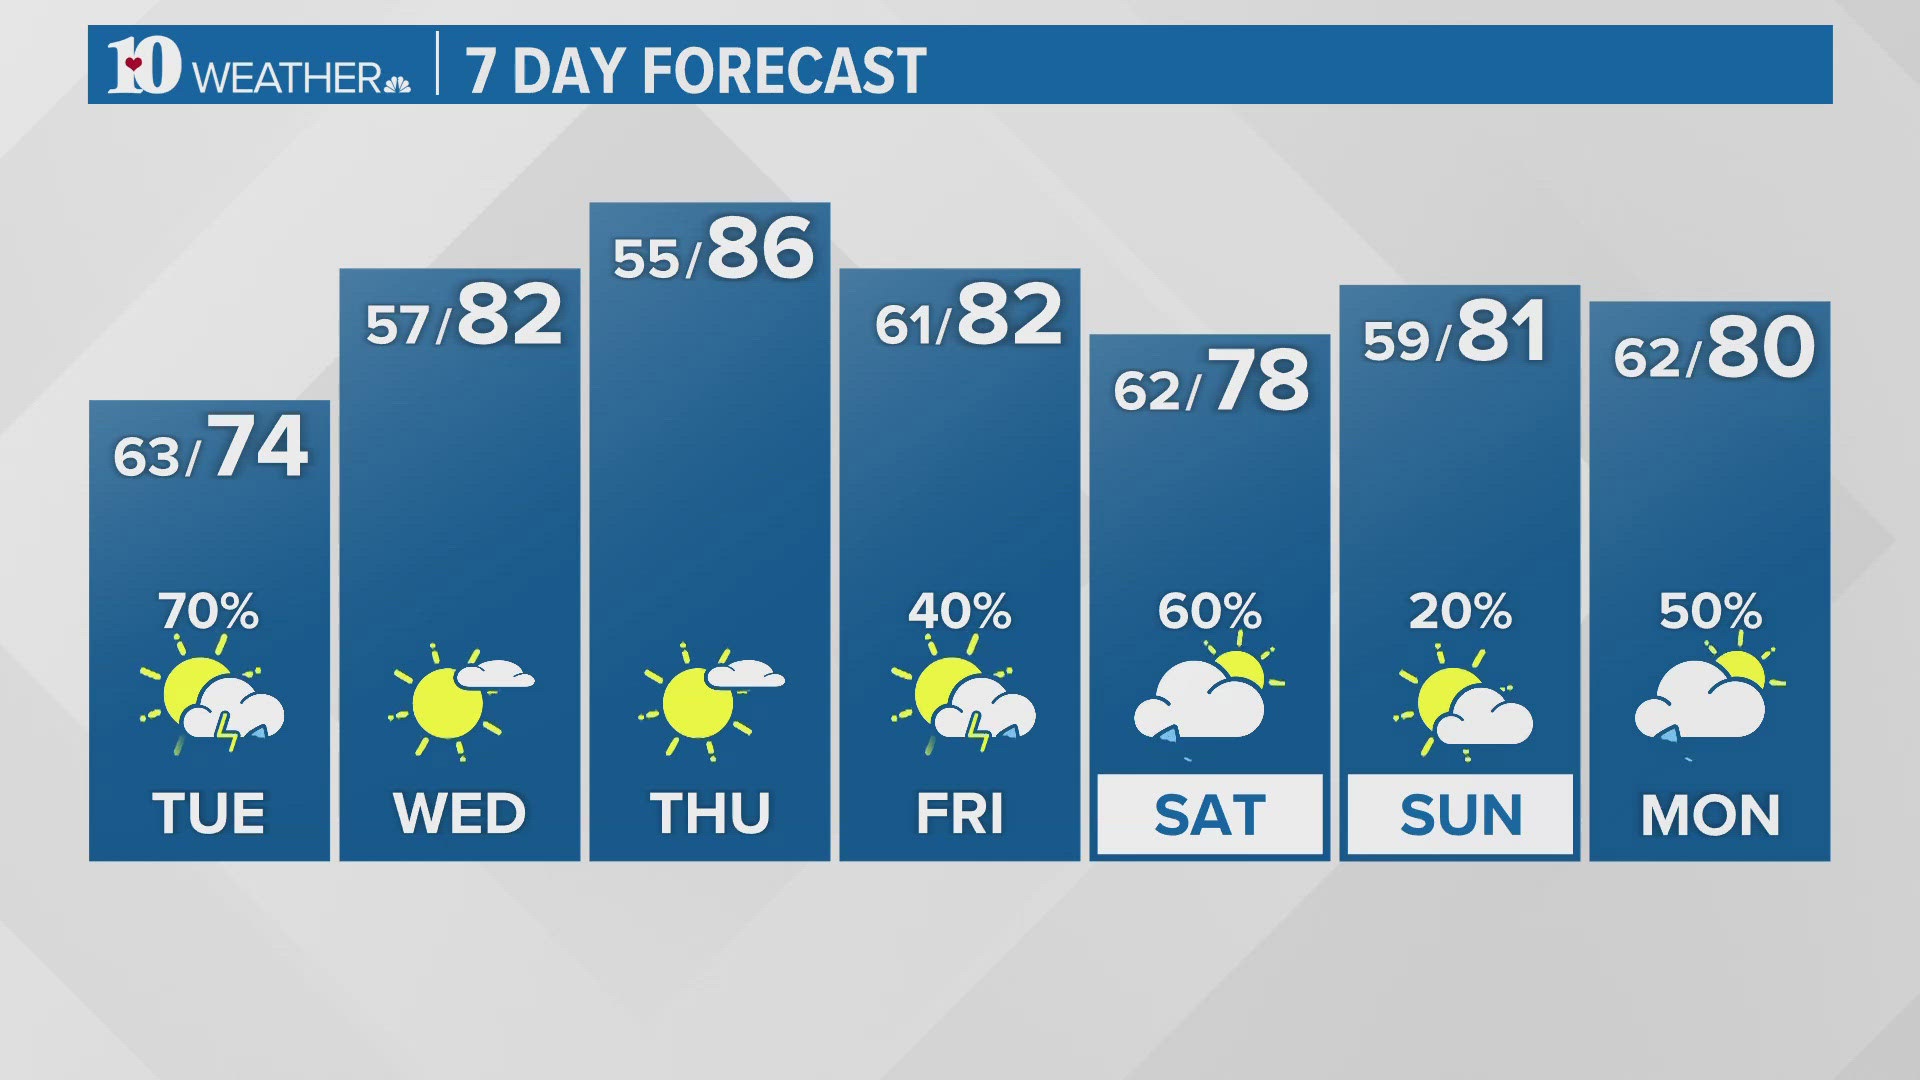 Warm temperatures with increasing sunshine returns mid-week. Our next chance for scattered showers and a few storms returns Friday into Saturday.